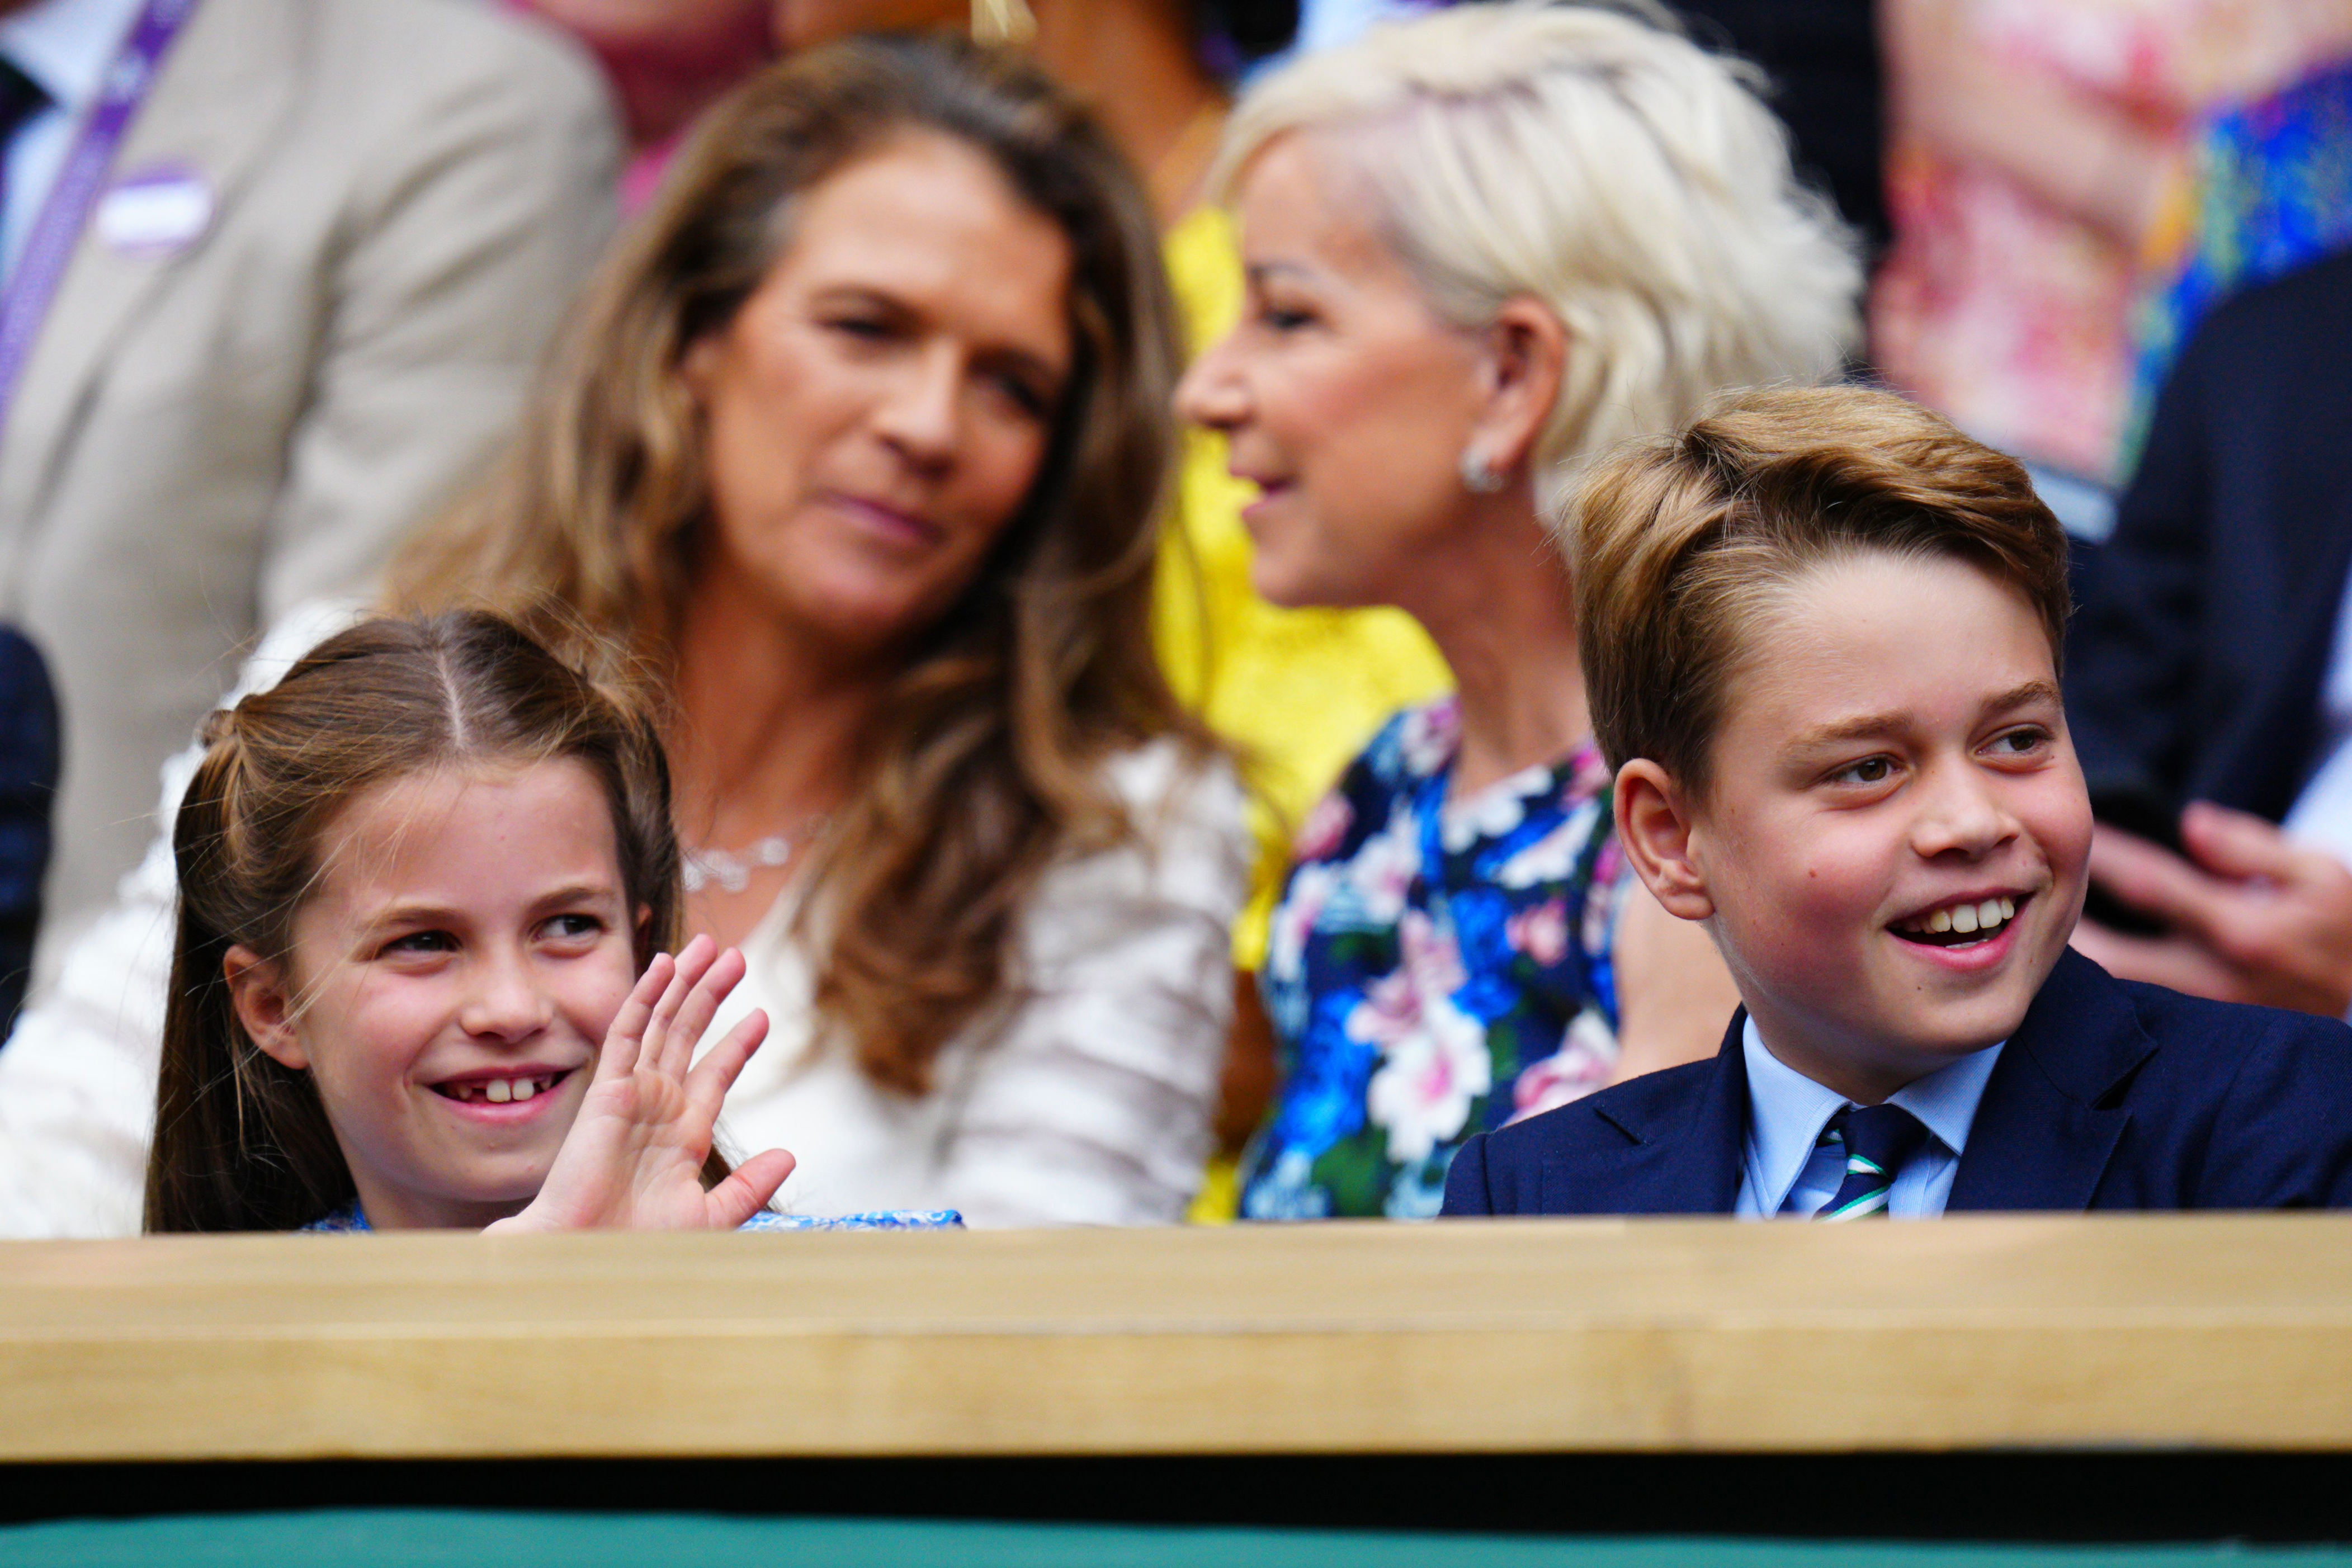 <p>Princess Charlotte and Prince George smiled and waved -- that's tennis legend Chris Evert behind them -- from the Royal Box on Centre Court during the Men's Singles final match on day 14 of the <a href="https://www.wonderwall.com/celebrity/wimbledon-2023-the-best-pictures-of-royals-and-stars-at-the-tennis-championships-758994.gallery">Wimbledon Tennis Championships</a> at the All England Lawn Tennis and Croquet Club in London on July 16, 2023.</p>